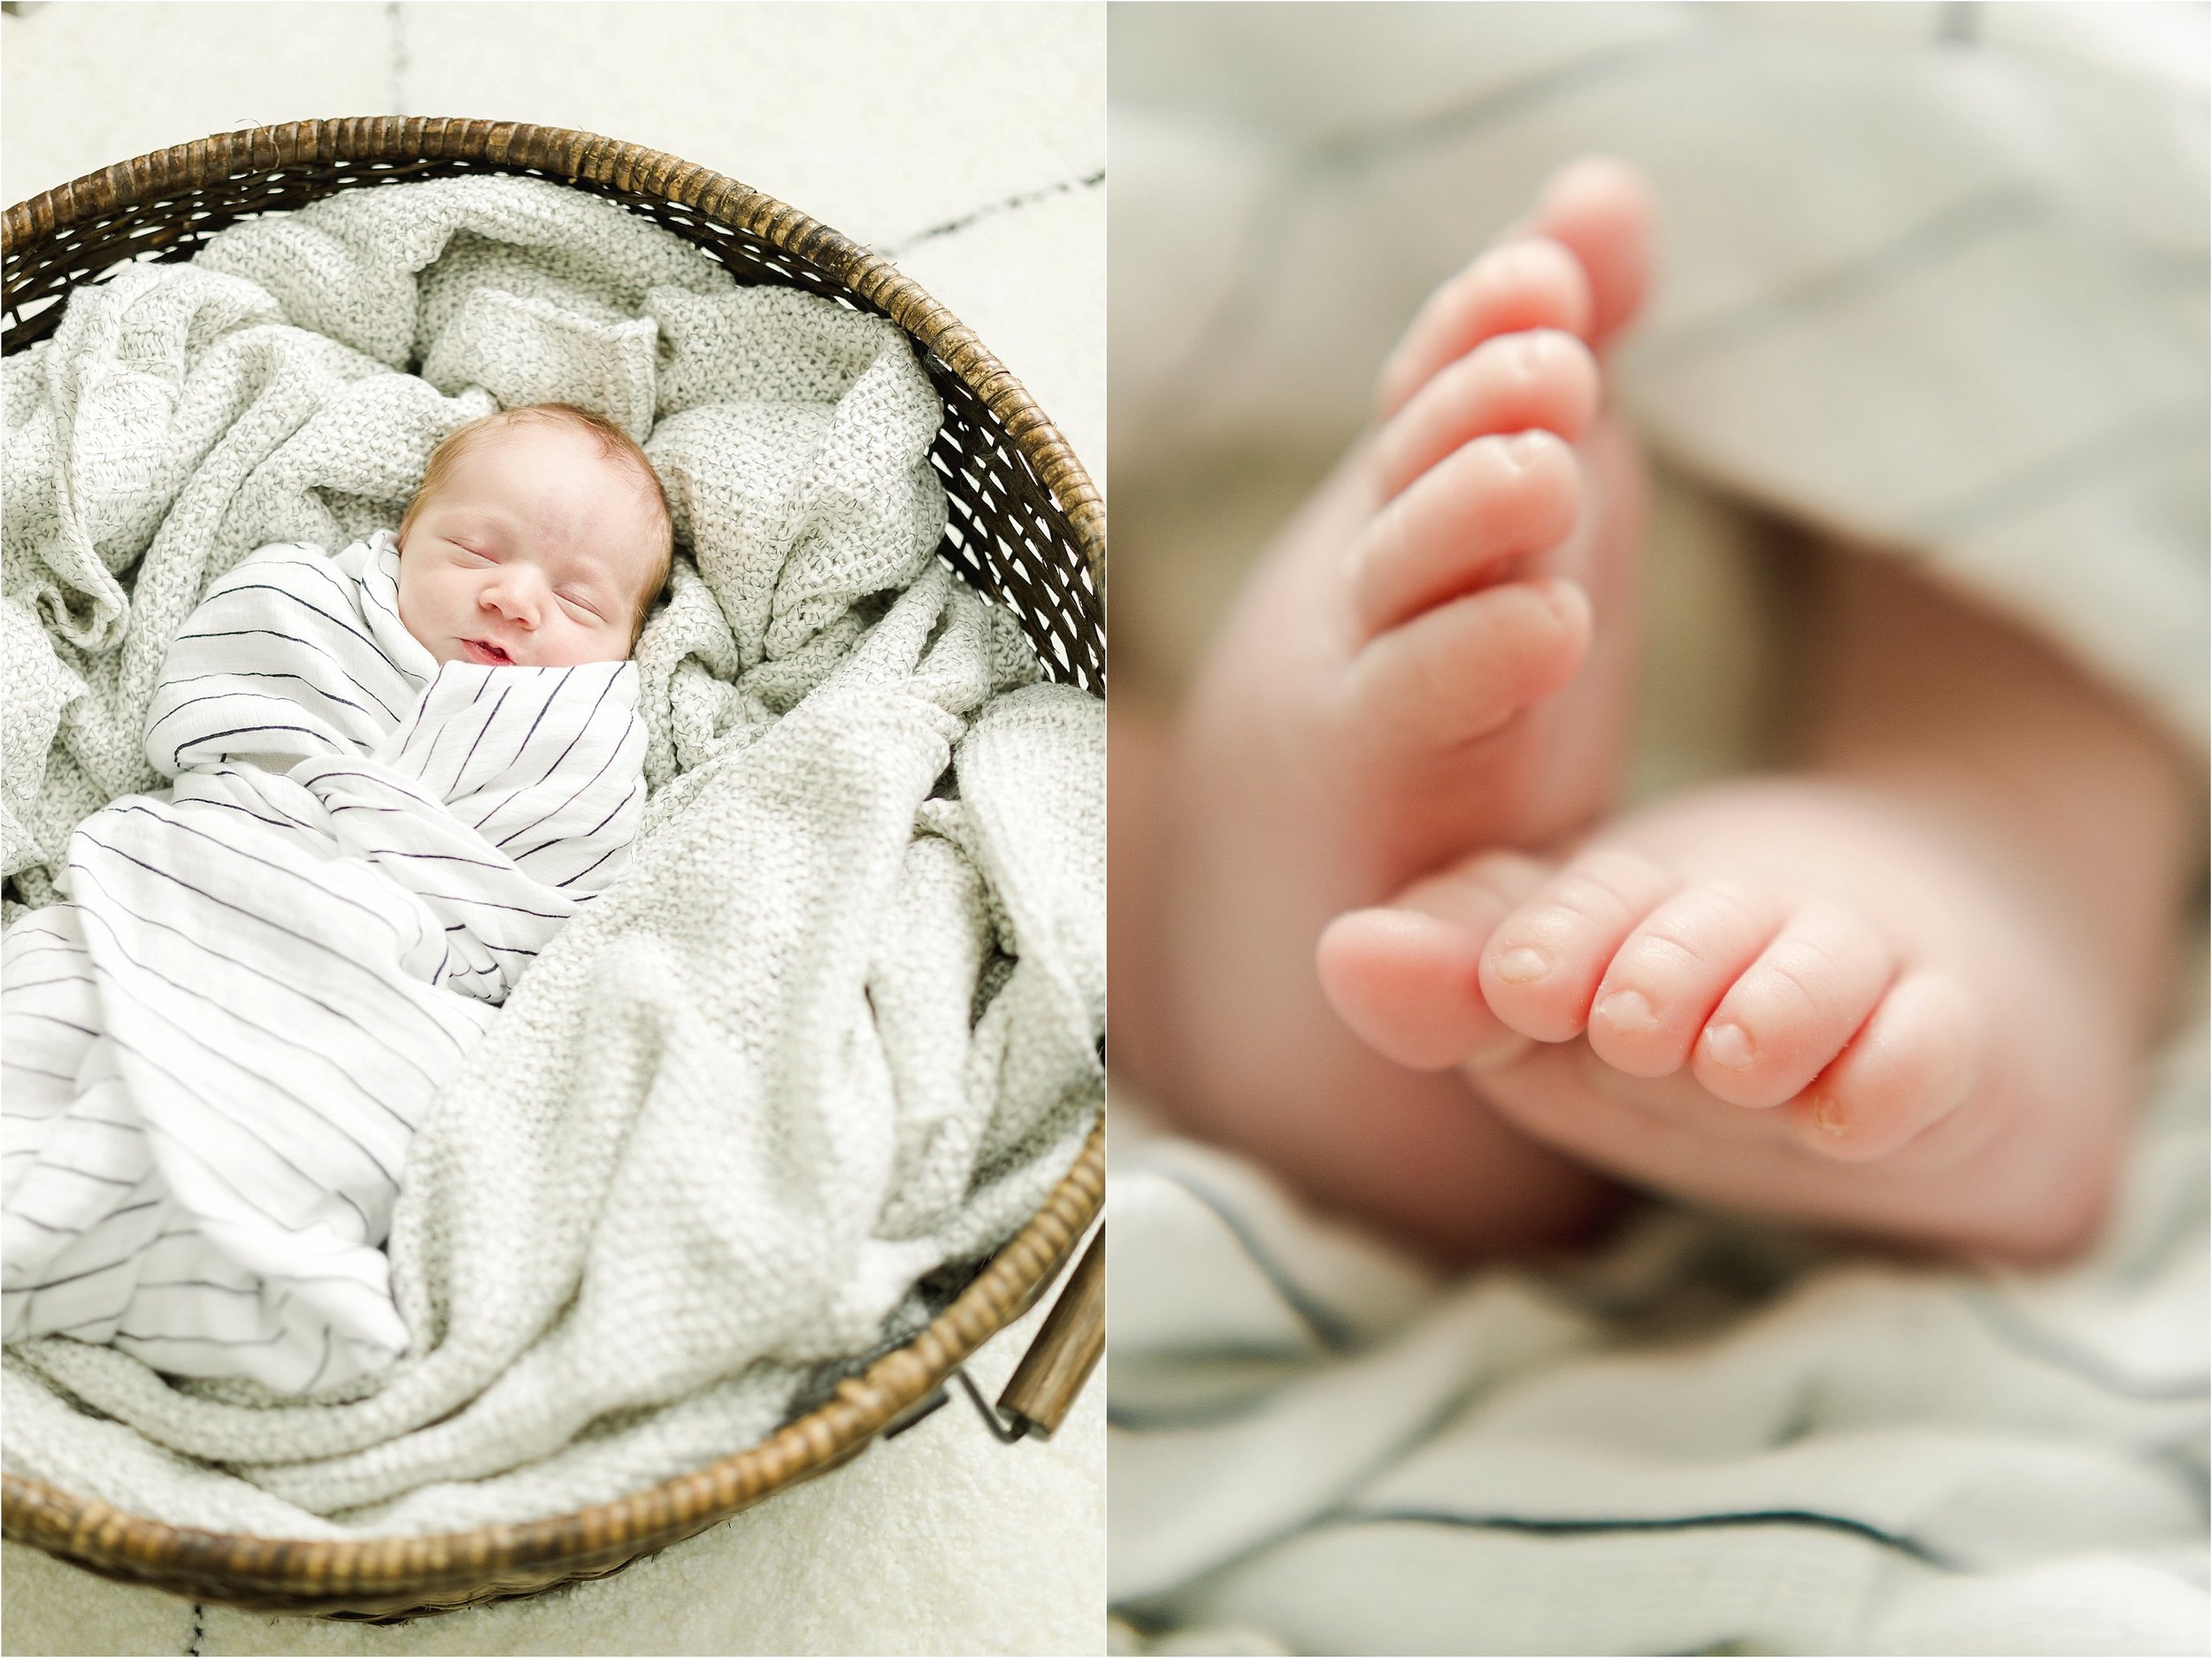 Image on the left shows baby boy in black and white striped swaddle lying in a basket.  Image on the right is a detail shot of the baby's feet.